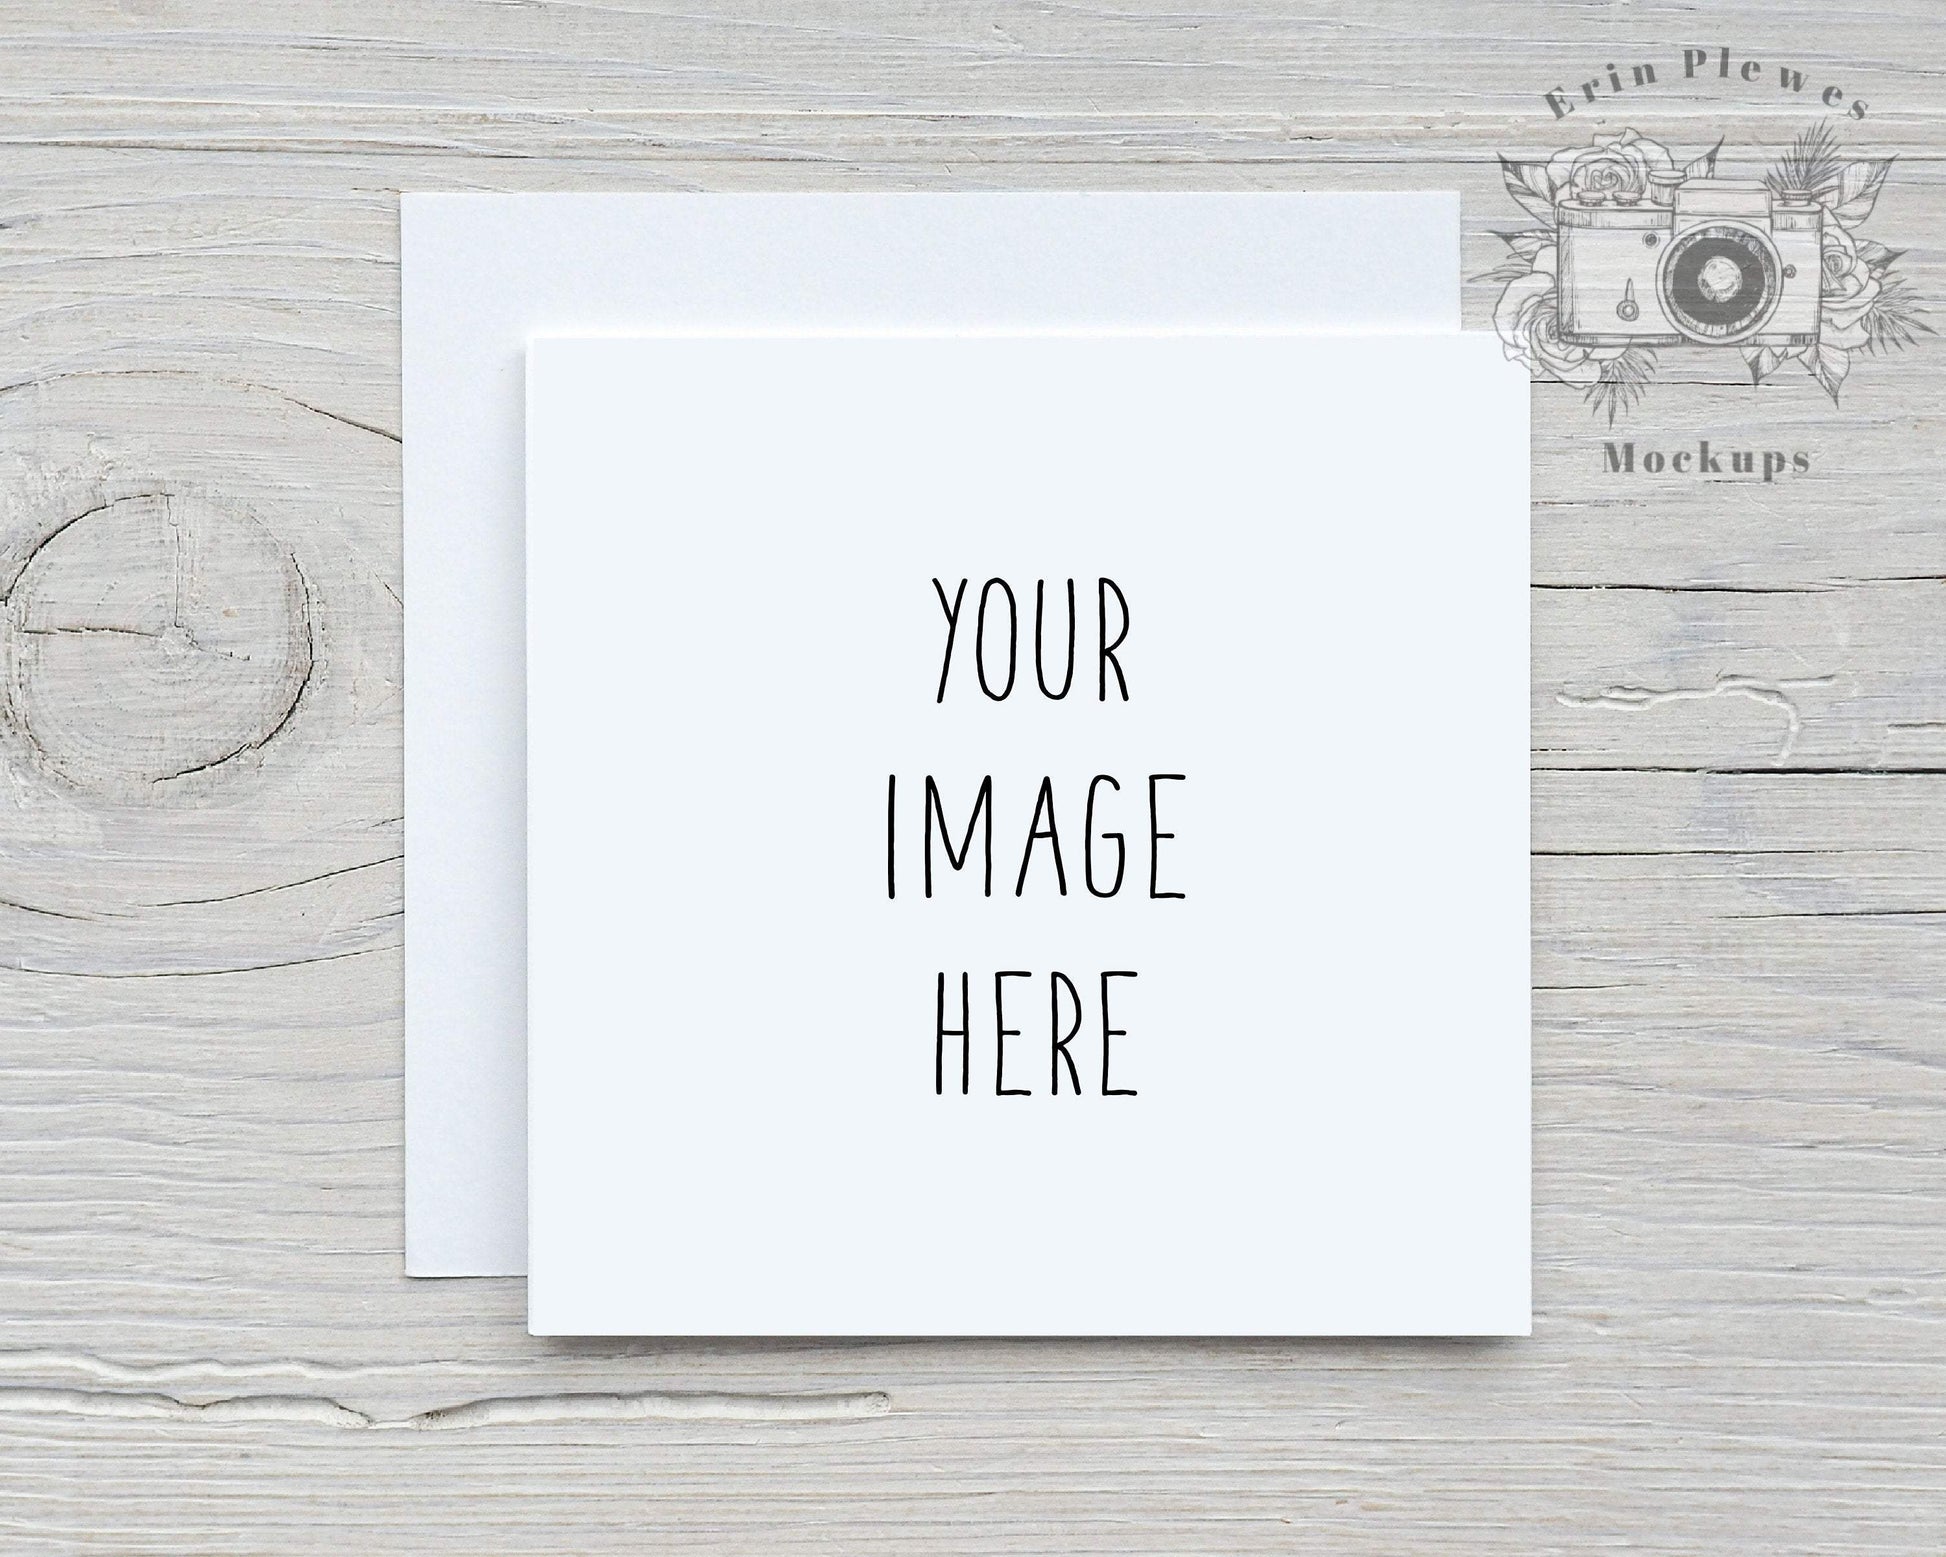 Erin Plewes Mockups Square Card Mockup with White Envelope, Square Invitation Mock Up for Rustic Wedding, Lifestyle Stock Photo Jpeg Template